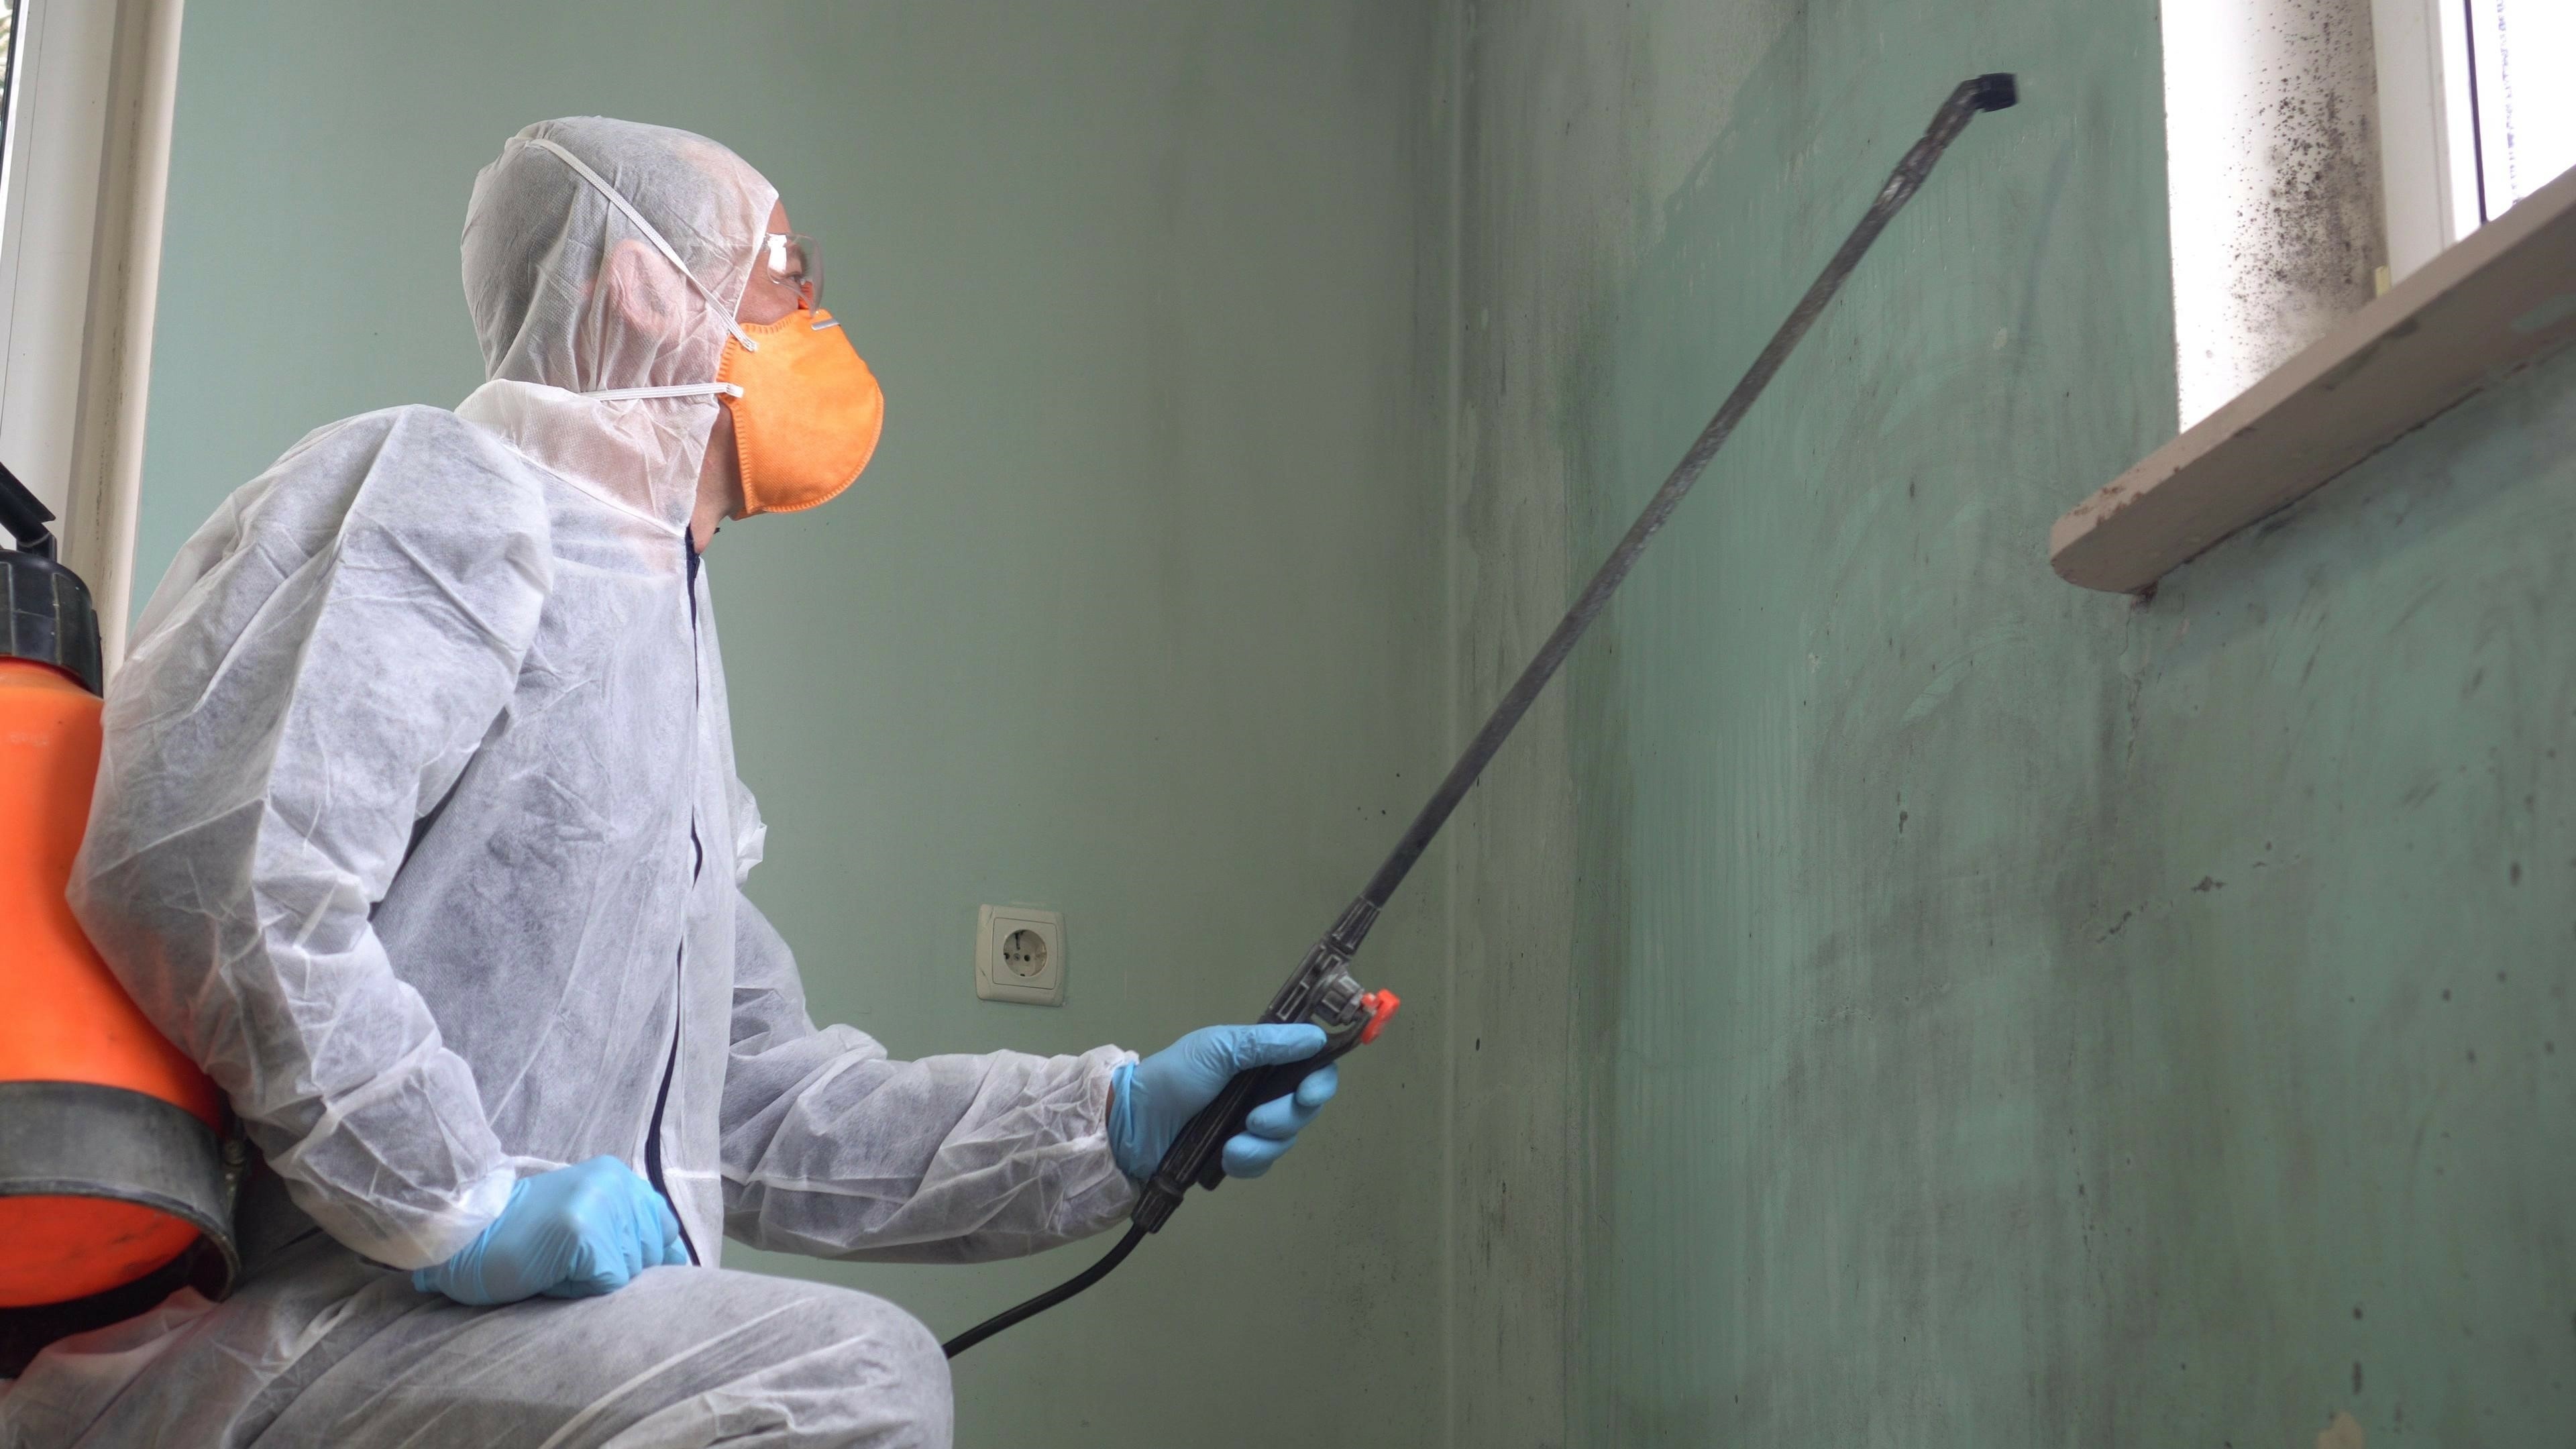 killing mold on a wall with chemicals